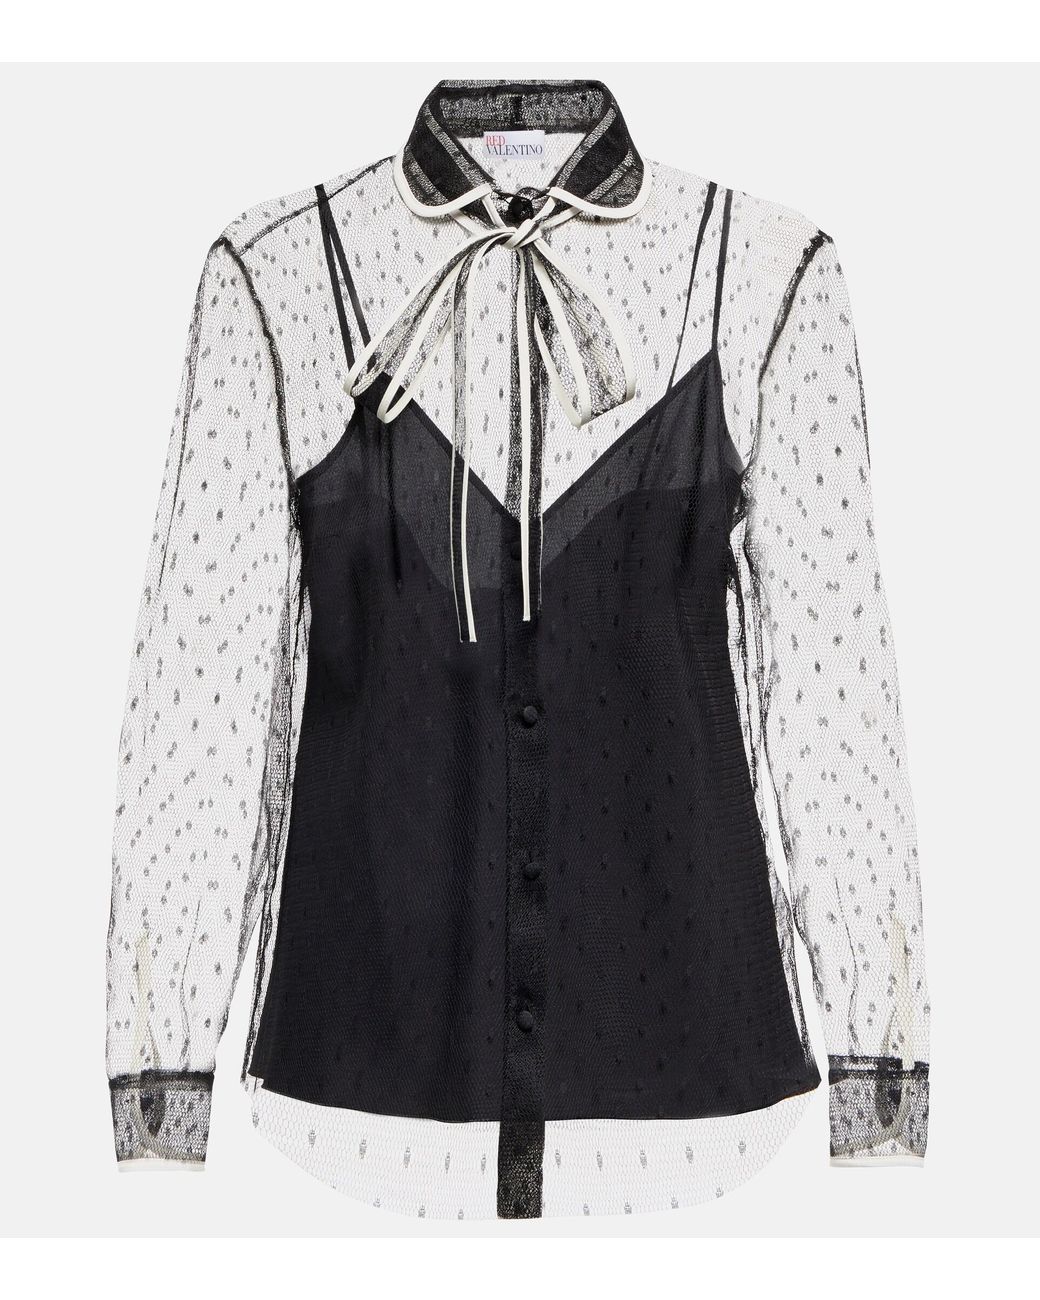 RED Valentino Sheer Point D'esprit Blouse in Black | Lyst